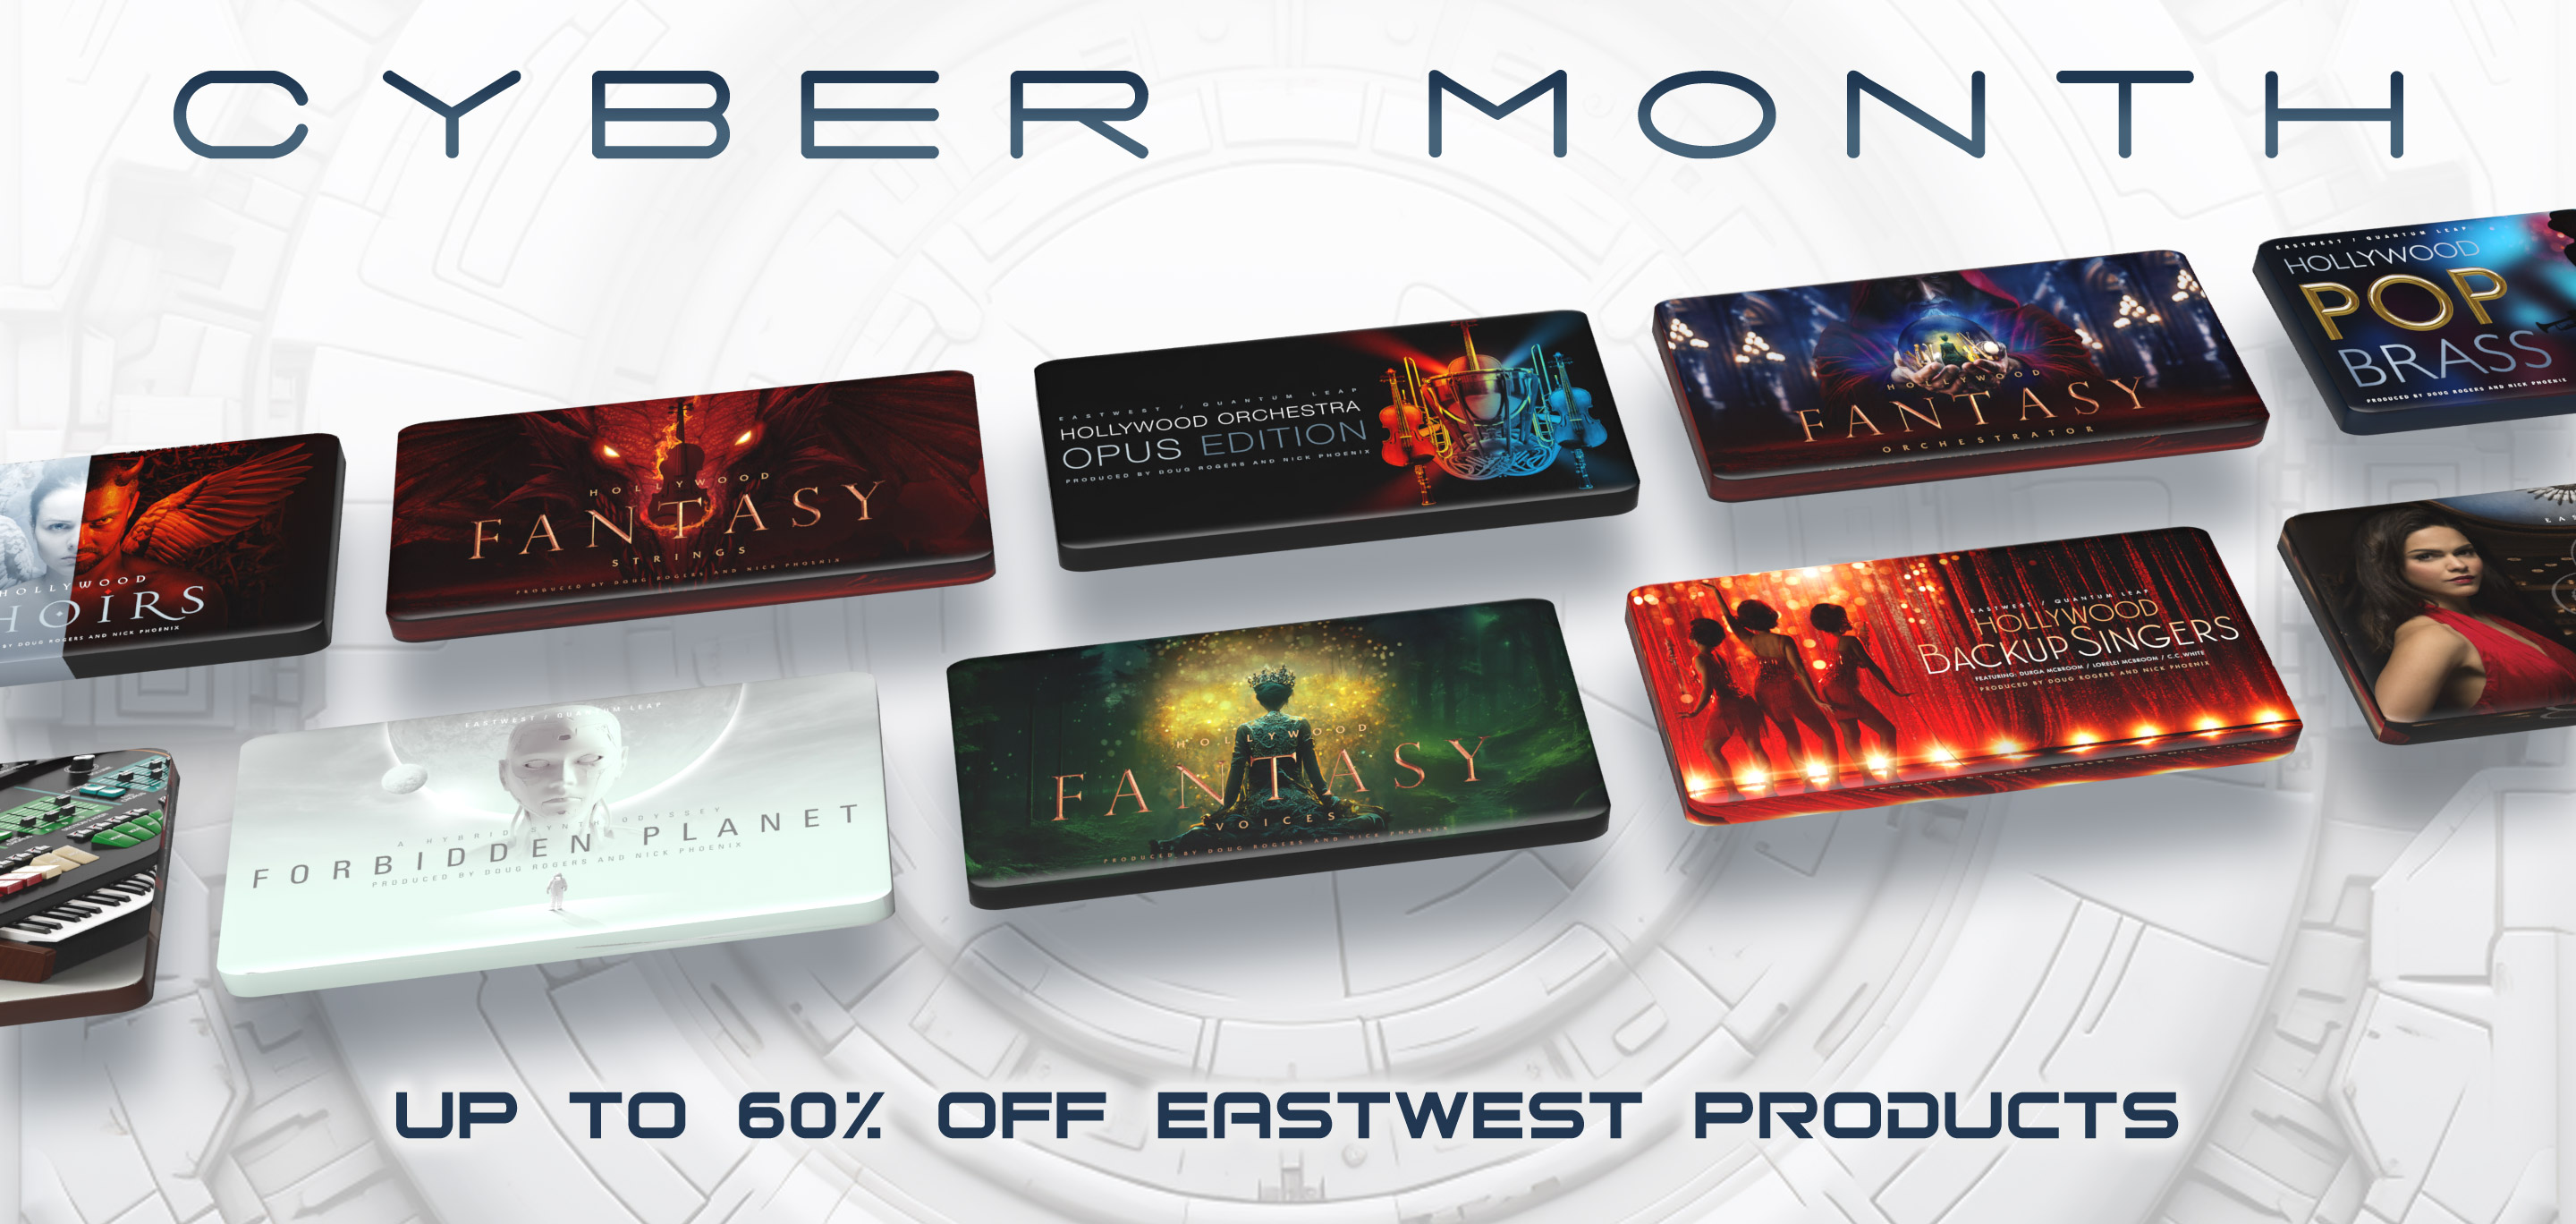 EastWest Cyber Month - Save up to 60% off all EastWest Products